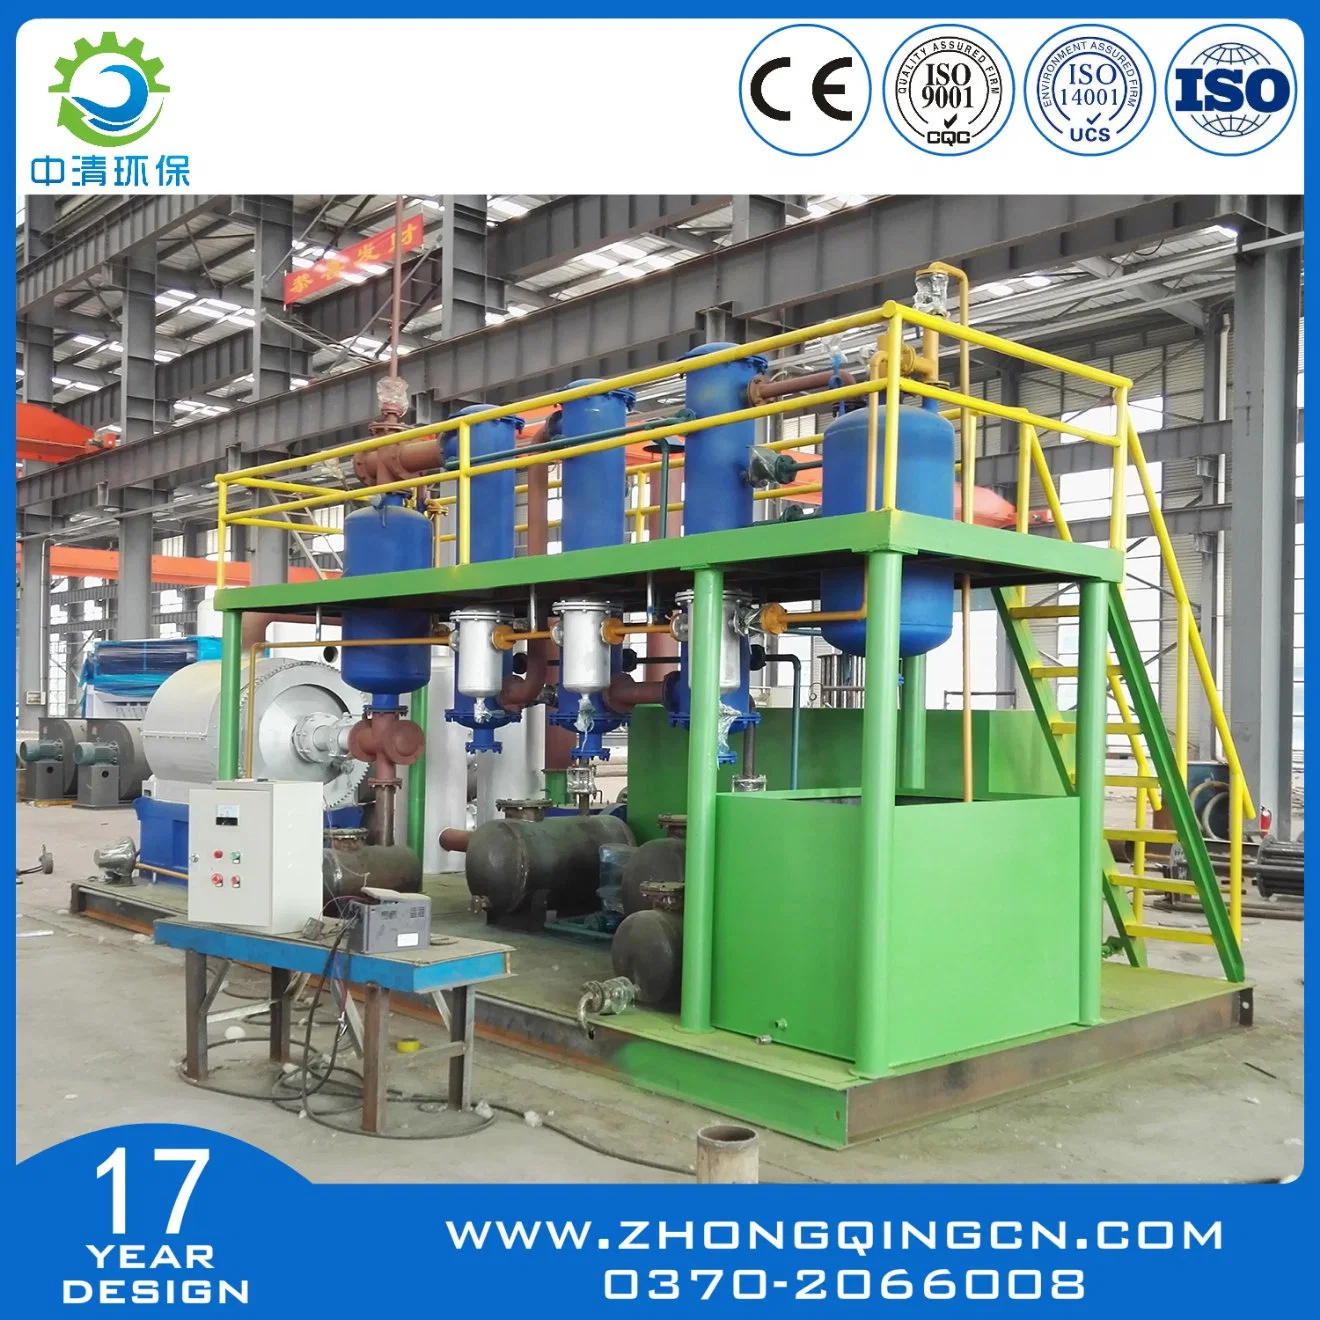 Used Plastics/Used Rubber/Used Tires Pyrolysis Machine/Recycling Machine/Processing Machine/Waste Treatment to Oil with CE, SGS, ISO, BV